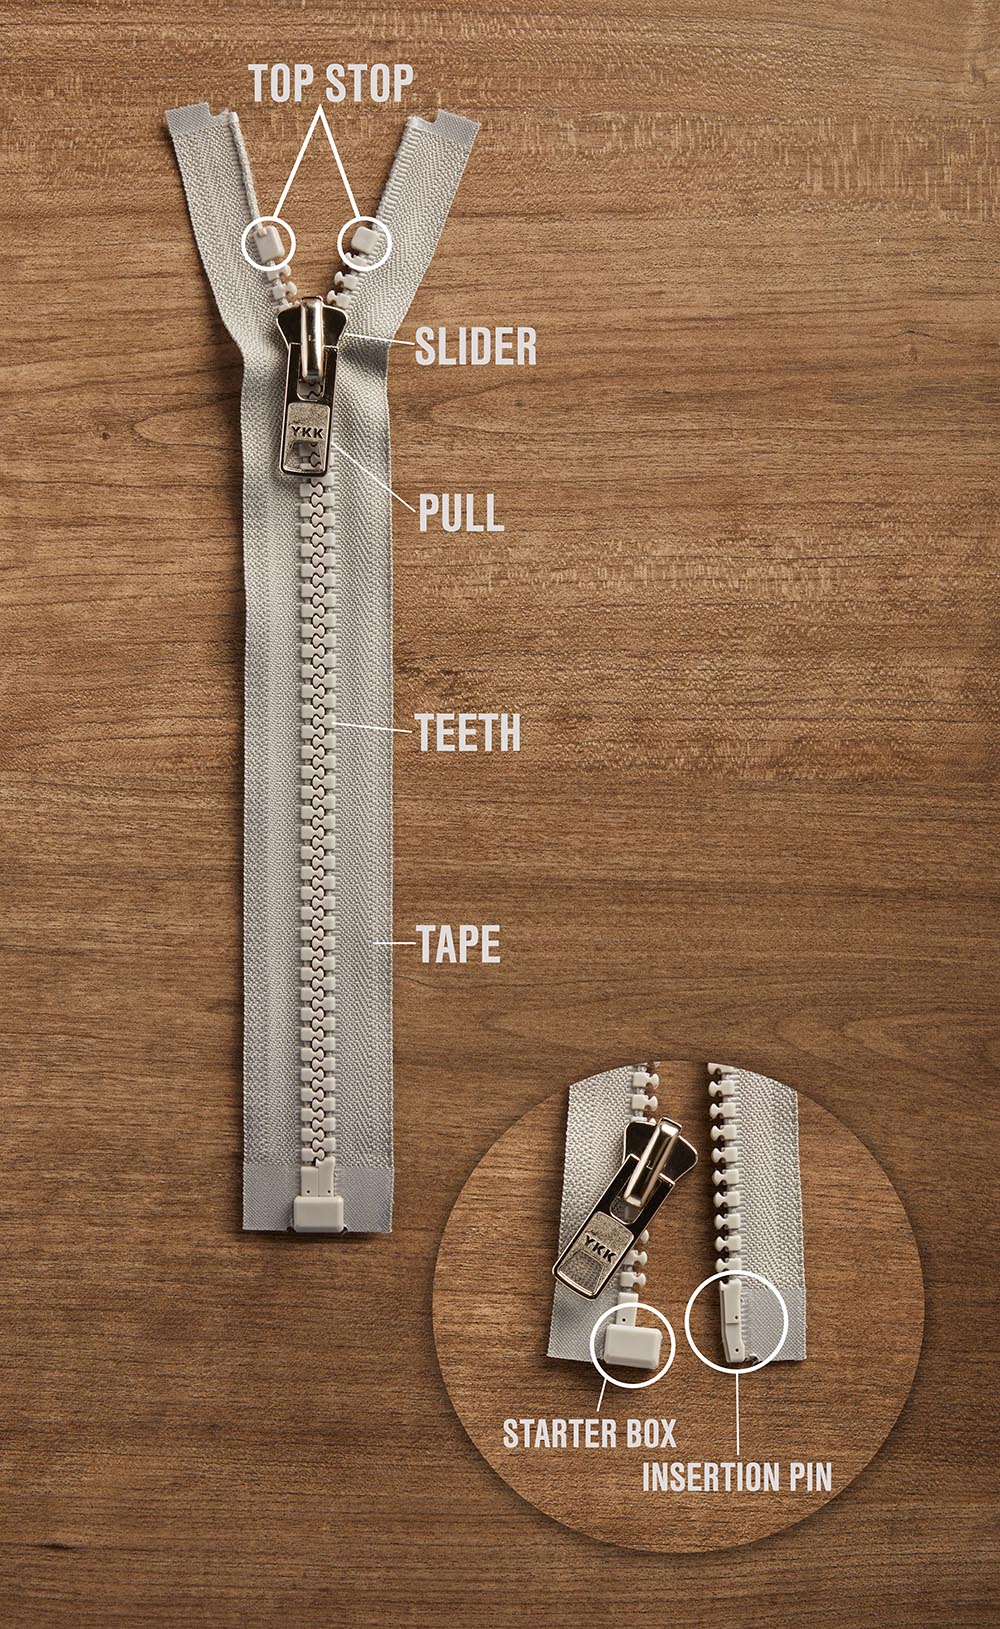 Parts of a zipper labeled and explained.